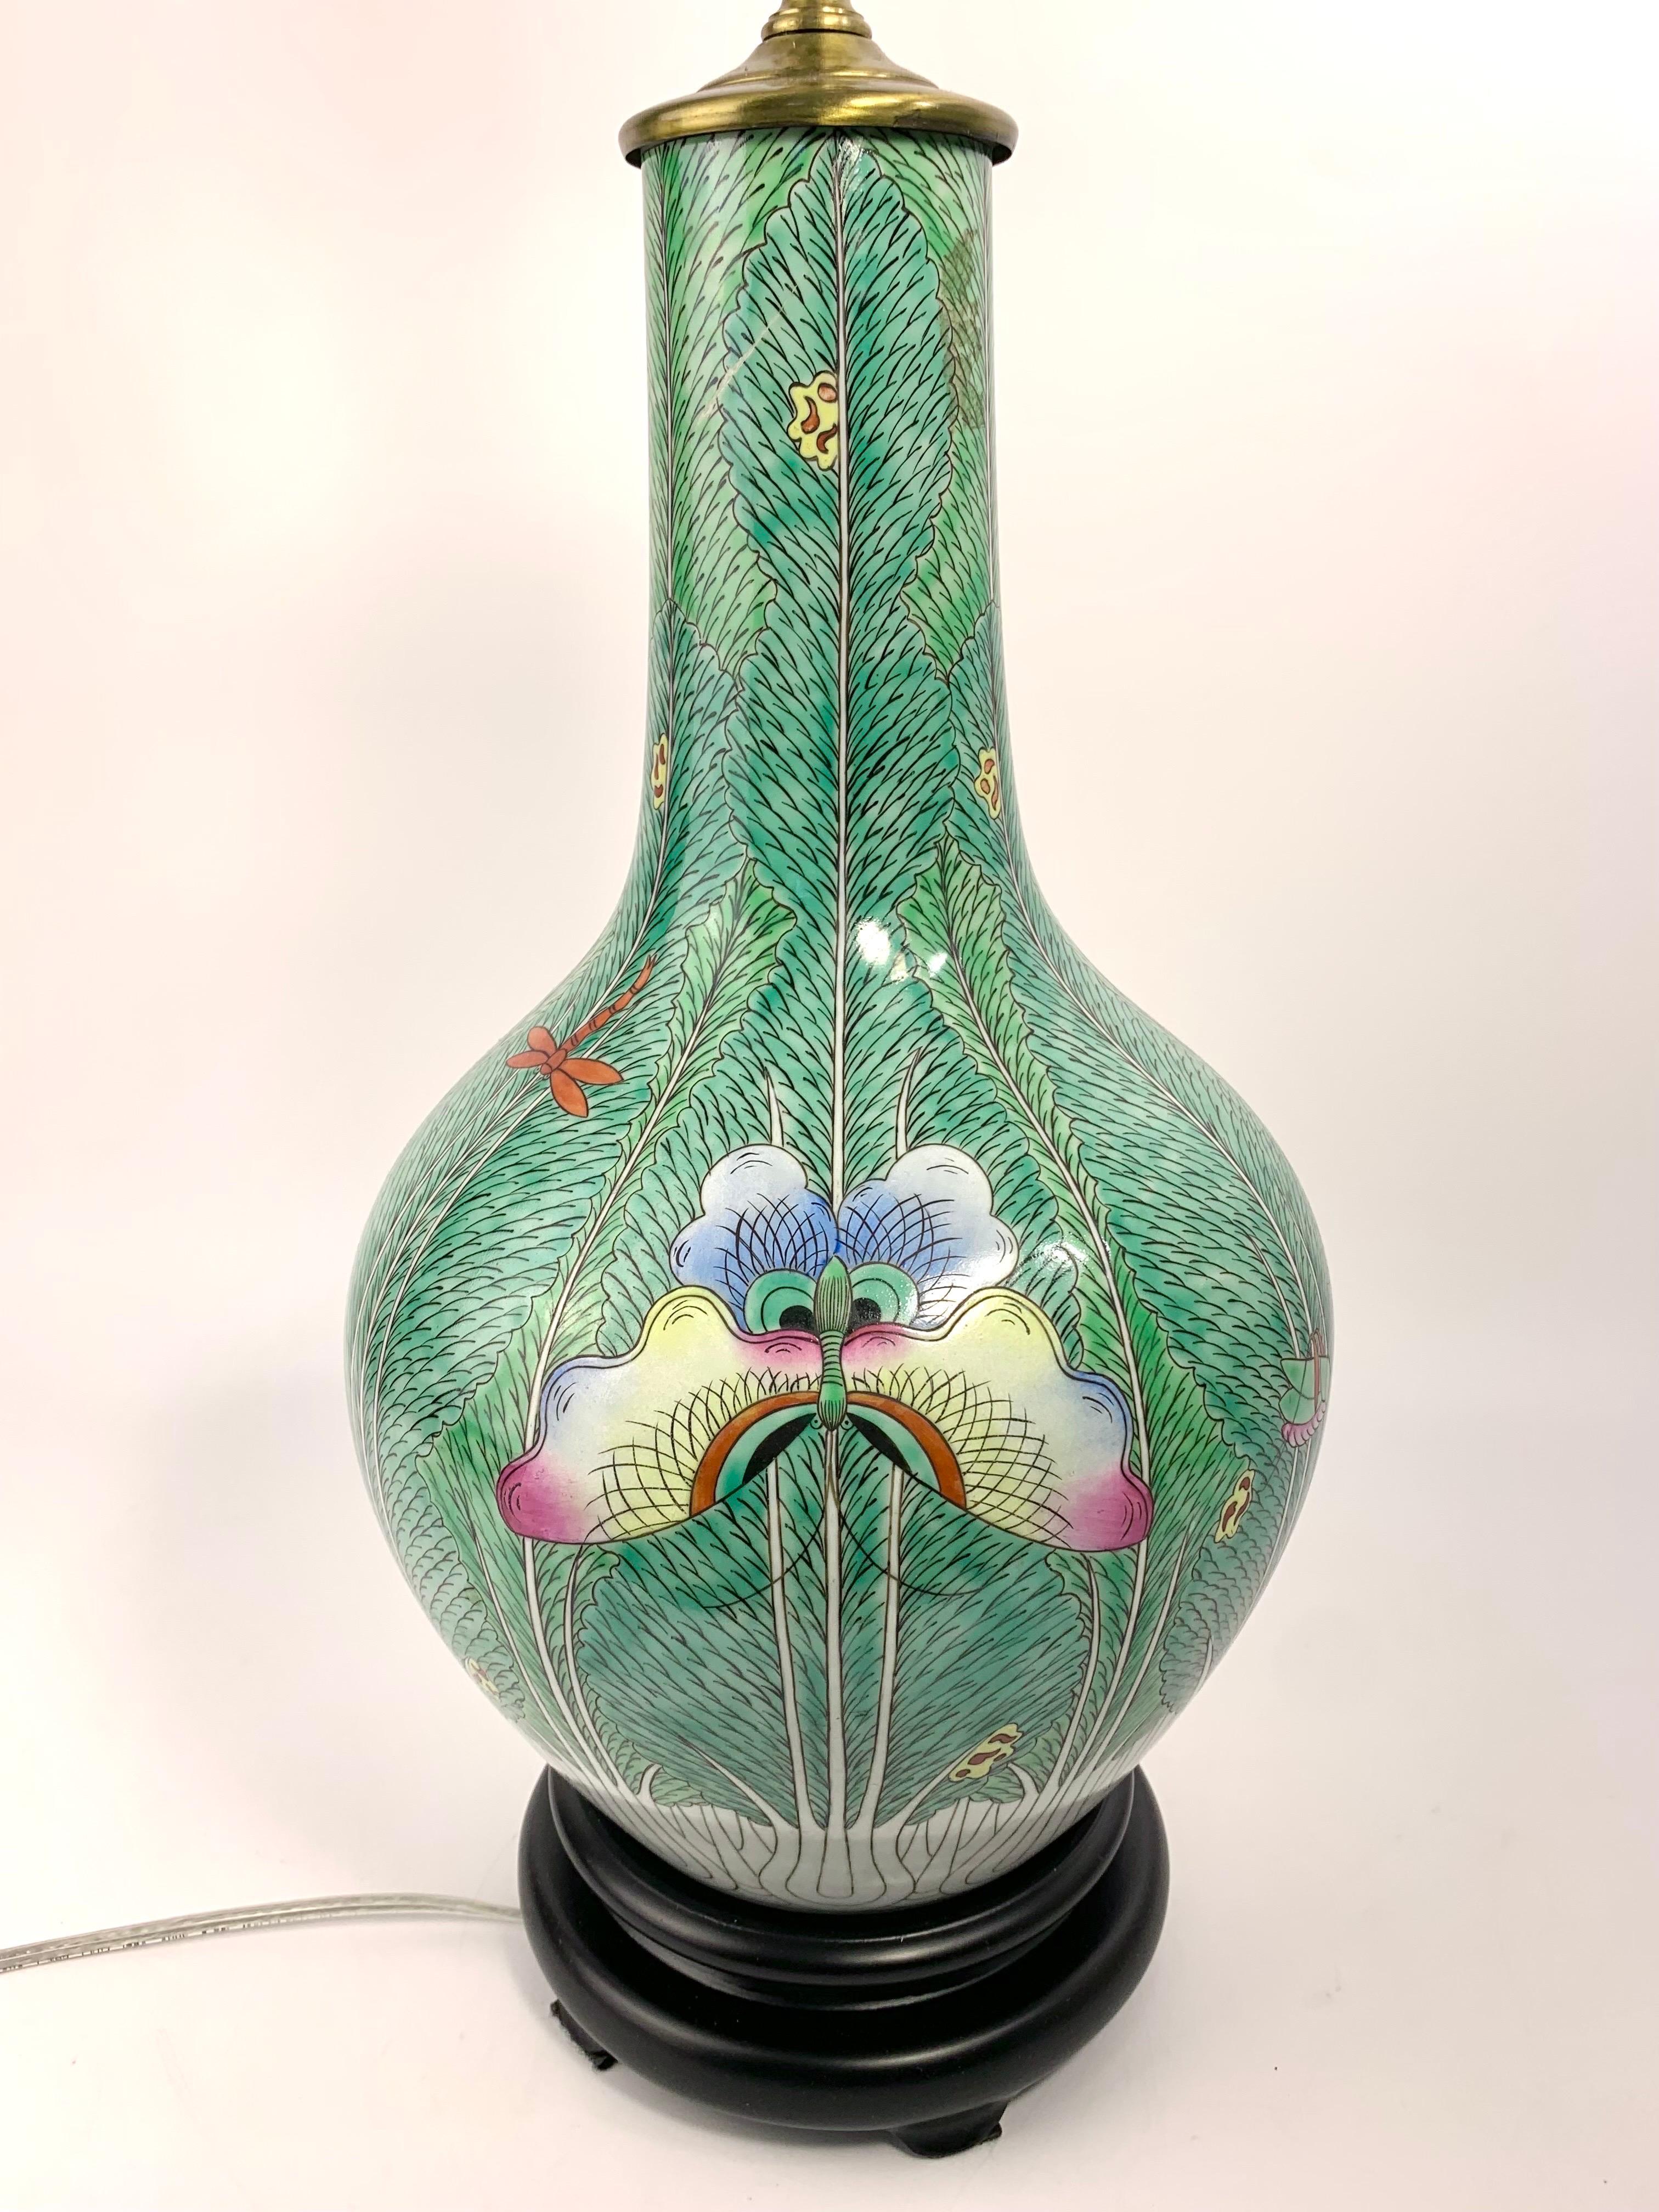 Beautiful famille verte green bok choy ceramic vase table lamp with brass fittings and a wood base. Colorful hand painted butterflies, grasshoppers, and other insects. 

Measures about 32” height x 8.5” diameter.